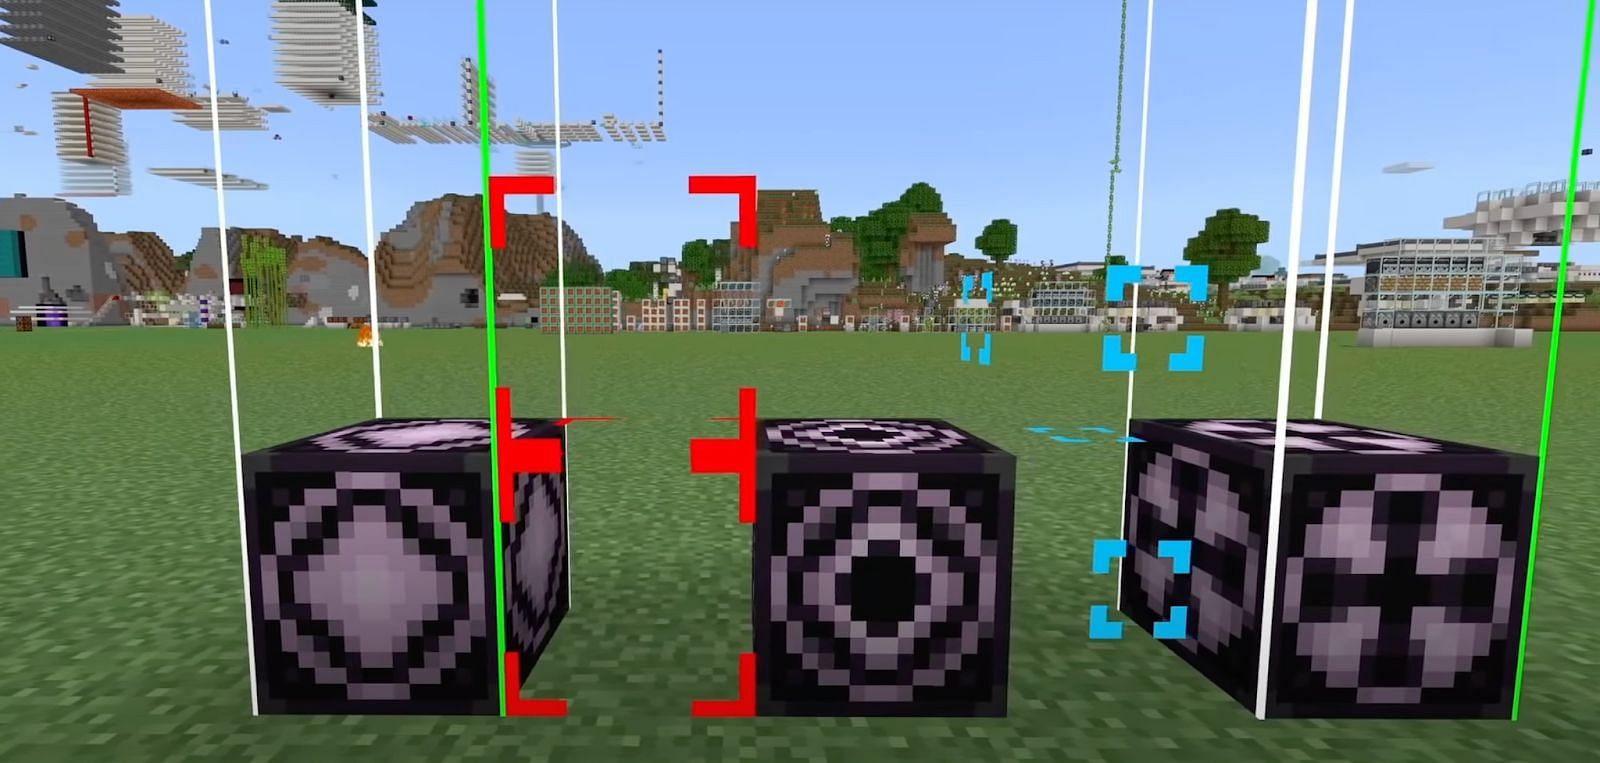 What are Structure blocks in Minecraft?